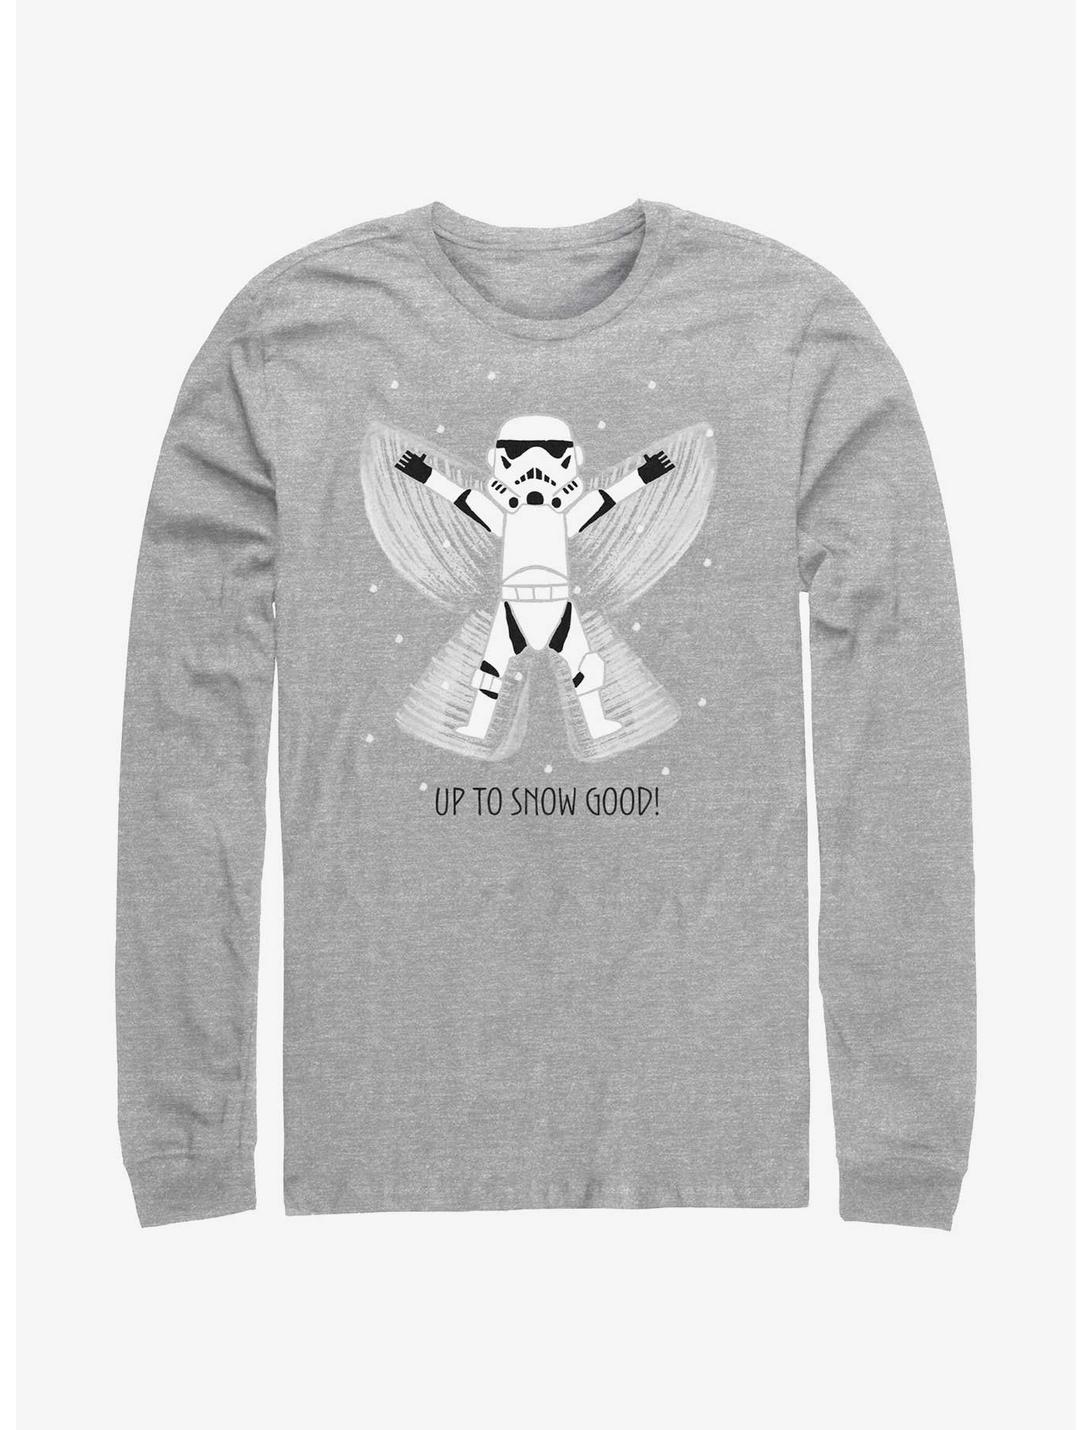 Star Wars Storm Trooper Up To Snow Good Long-Sleeve T-Shirt, ATH HTR, hi-res